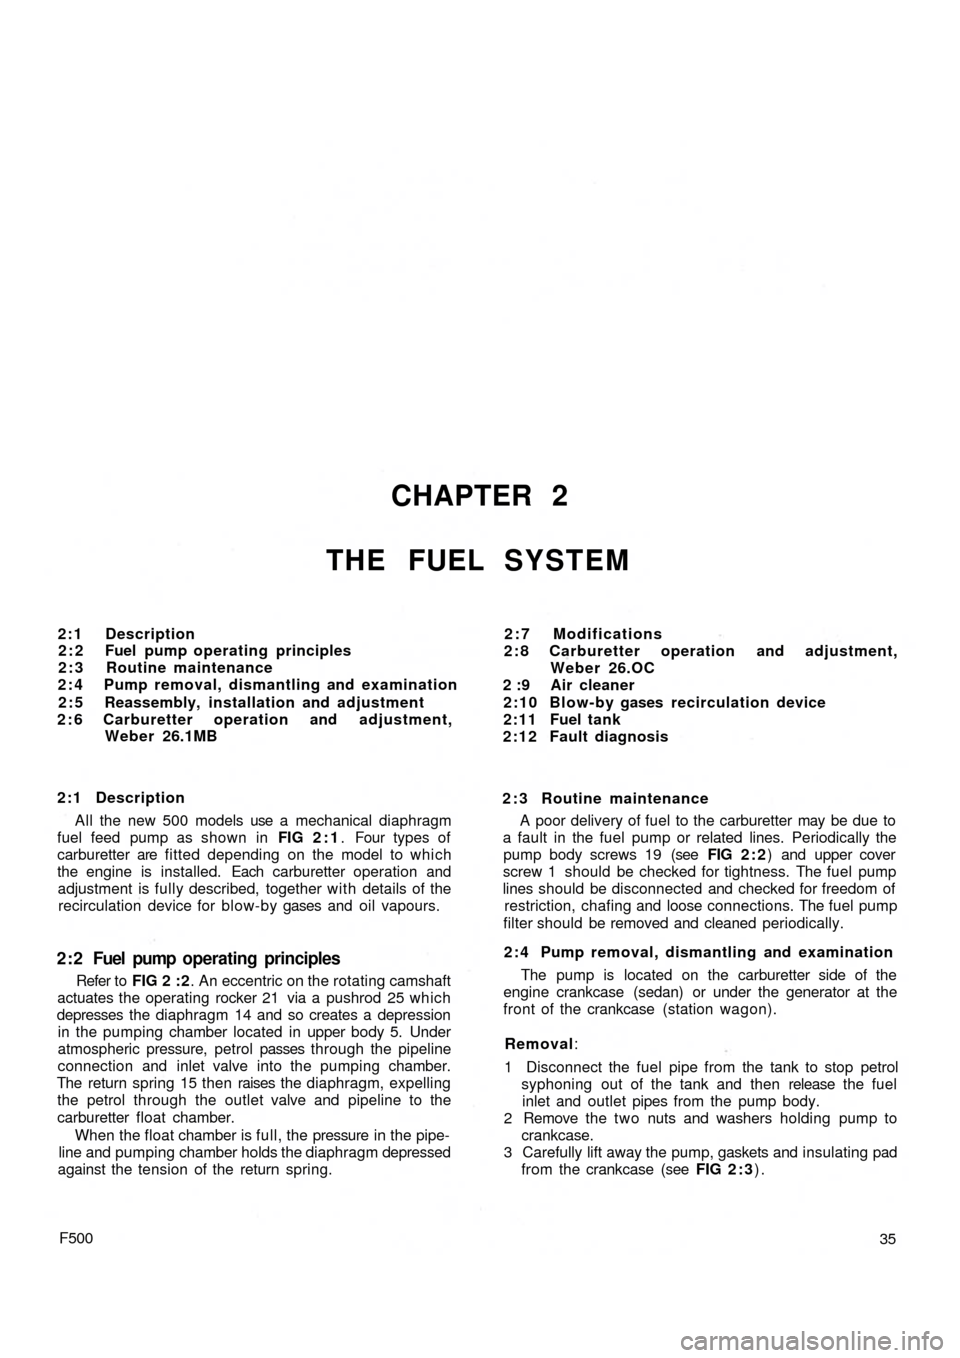 FIAT 500 1968 1.G Workshop Manual CHAPTER 2
THE FUEL SYSTEM
2:1 Description
2 : 2 Fuel pump operating principles
2 : 3 Routine maintenance
2 : 4 Pump removal, dismantling and examination
2 : 5 Reassembly, installation and adjustment
2